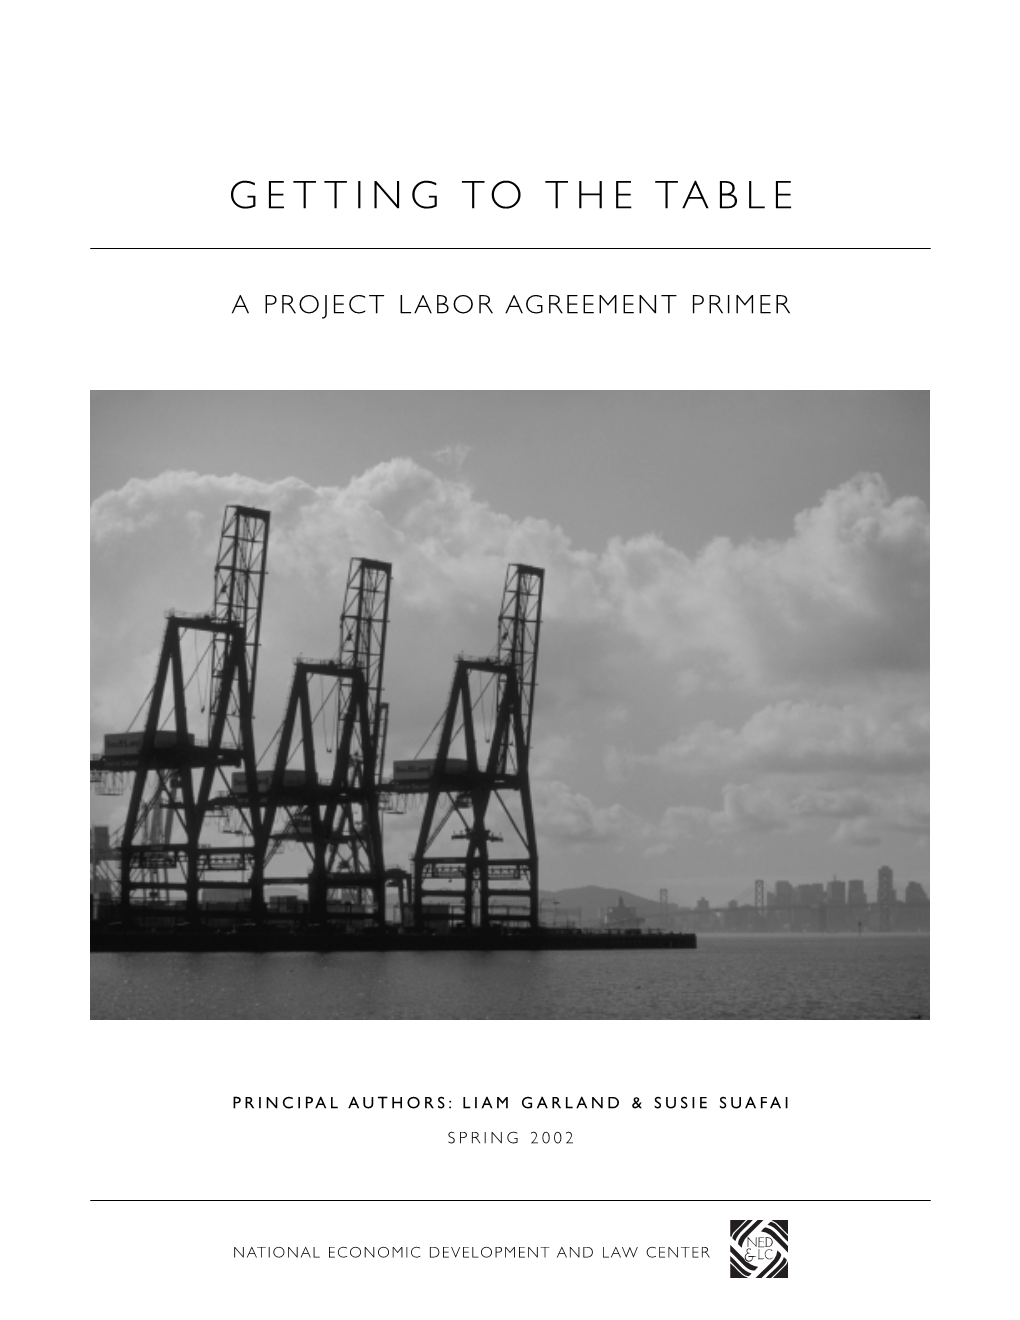 A Project Labor Agreement Primer